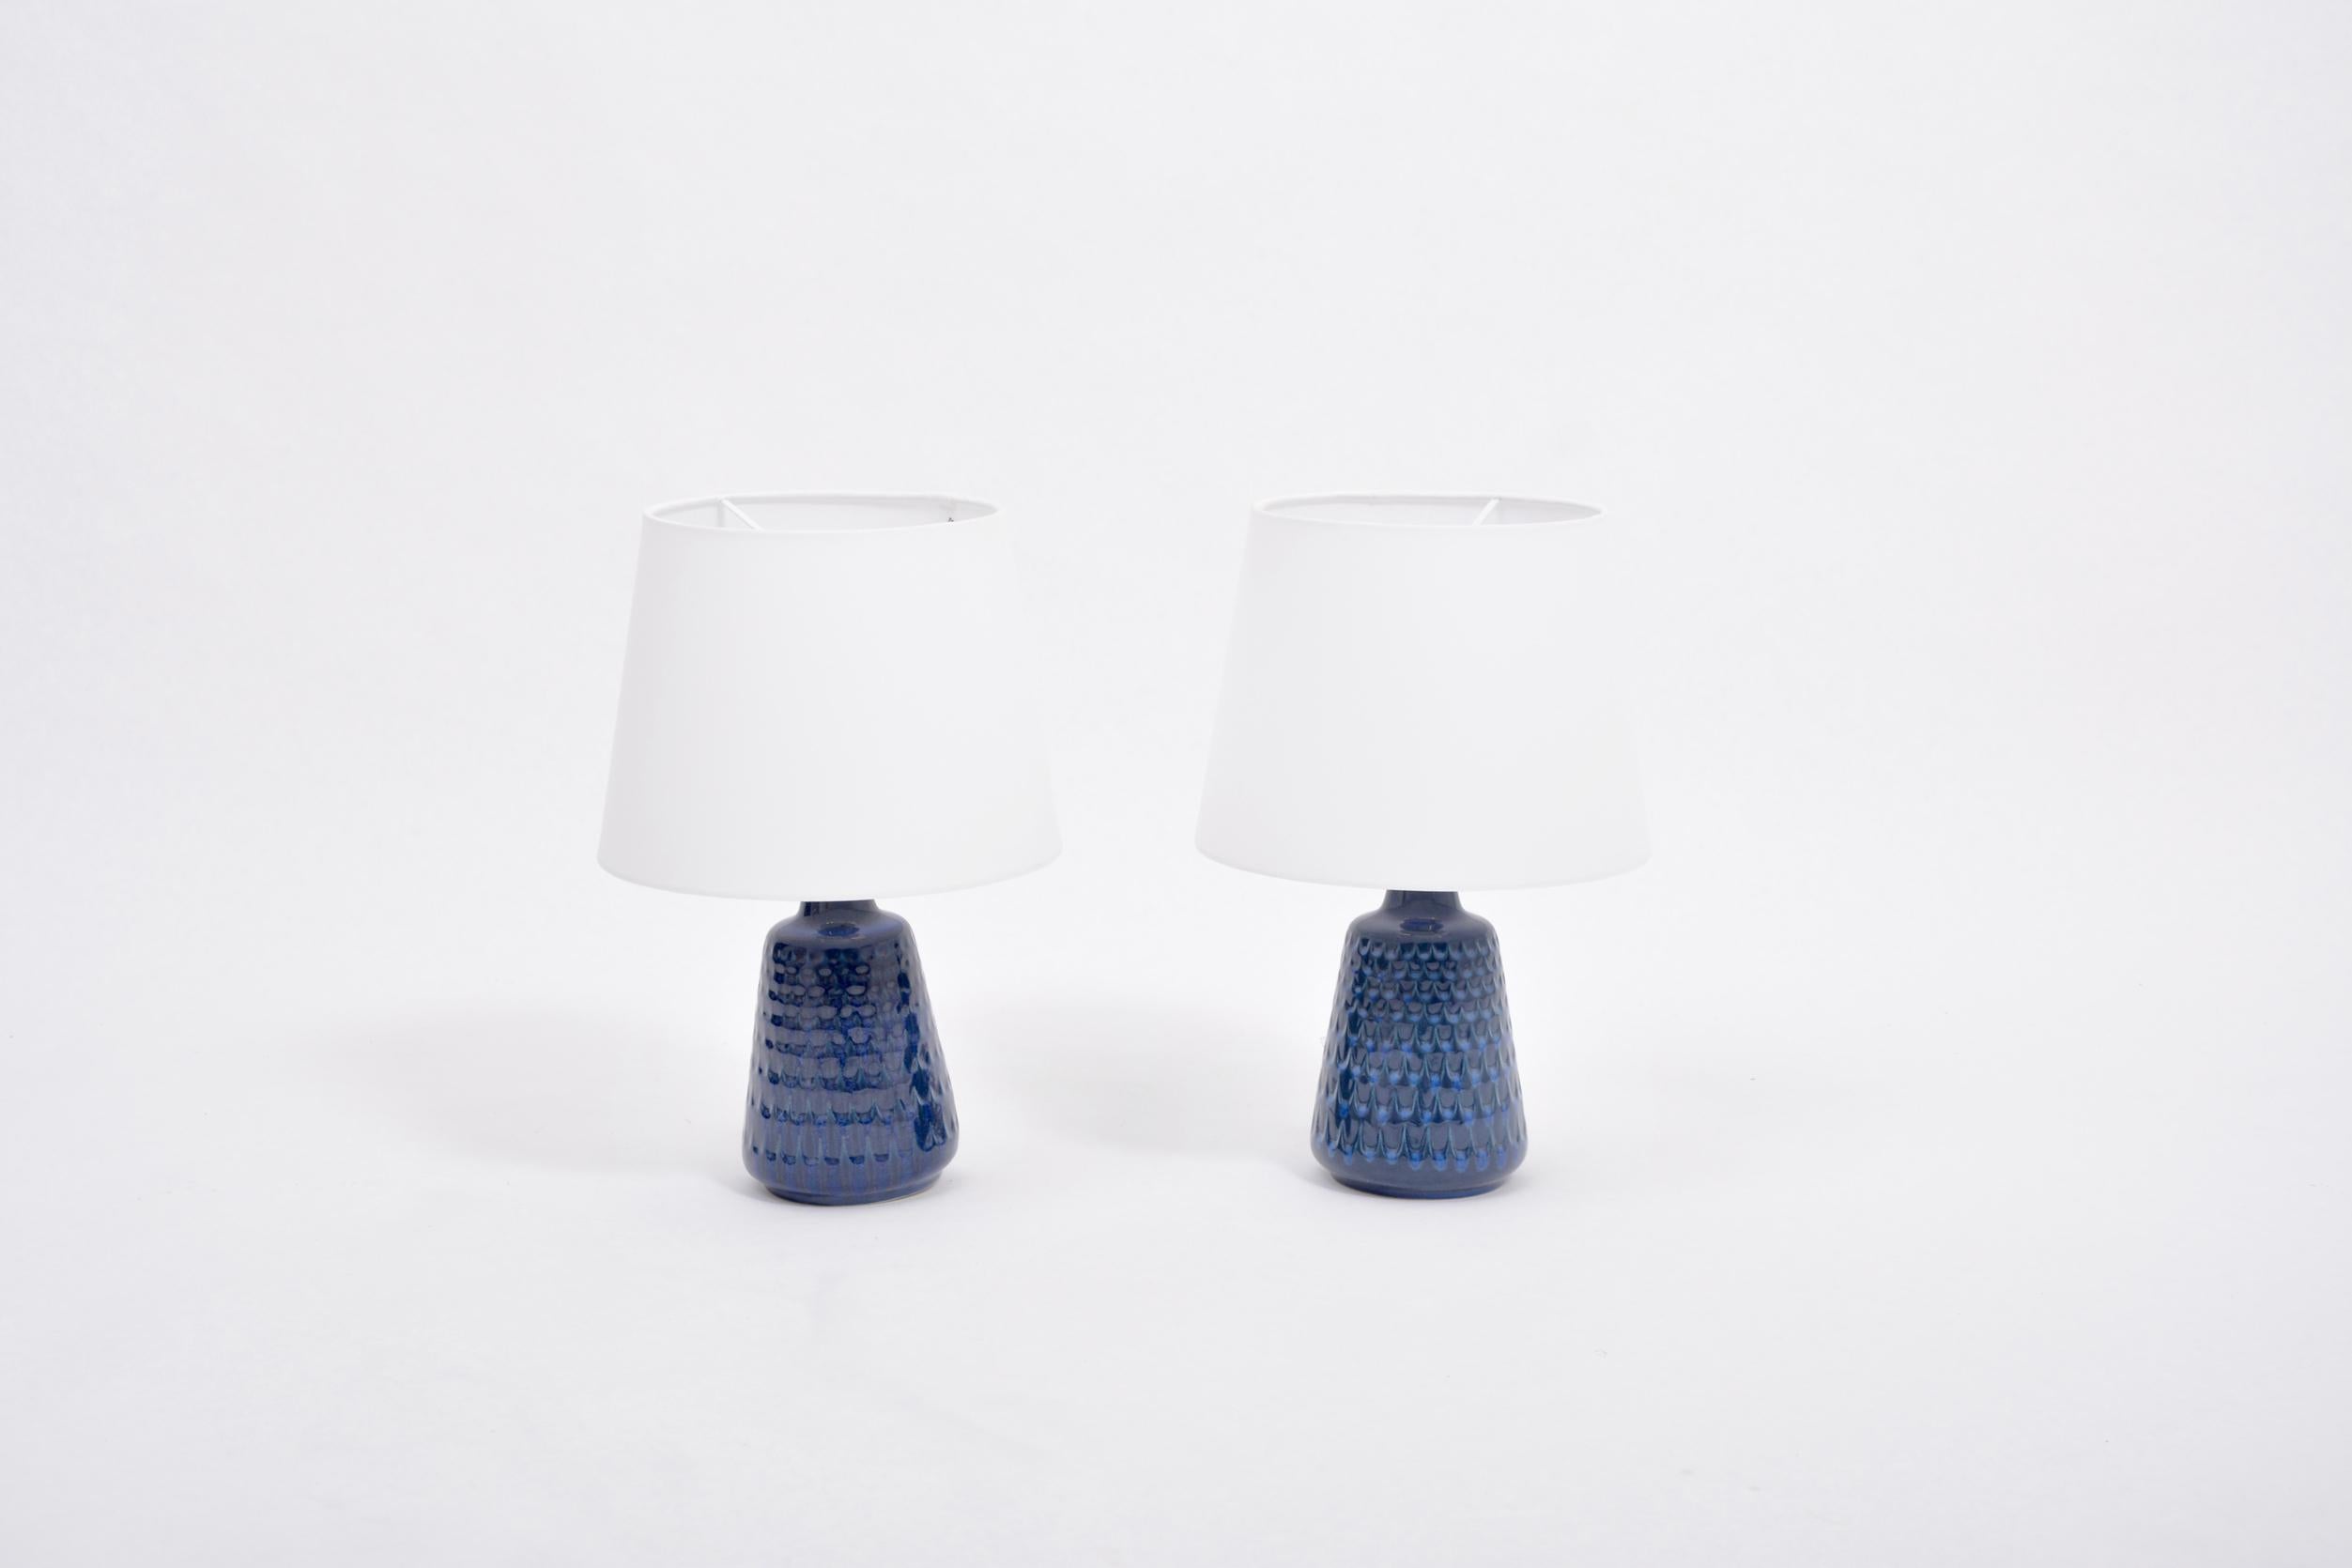 Pair of blue stoneware table lamps model 1019 by Einar Johansen for Søholm

Pair of vintage table lamps made of stoneware with blue ceramic glazing designed by Einar Johansen and produced by Danish company Soholm. This lamp is of the model 1019.